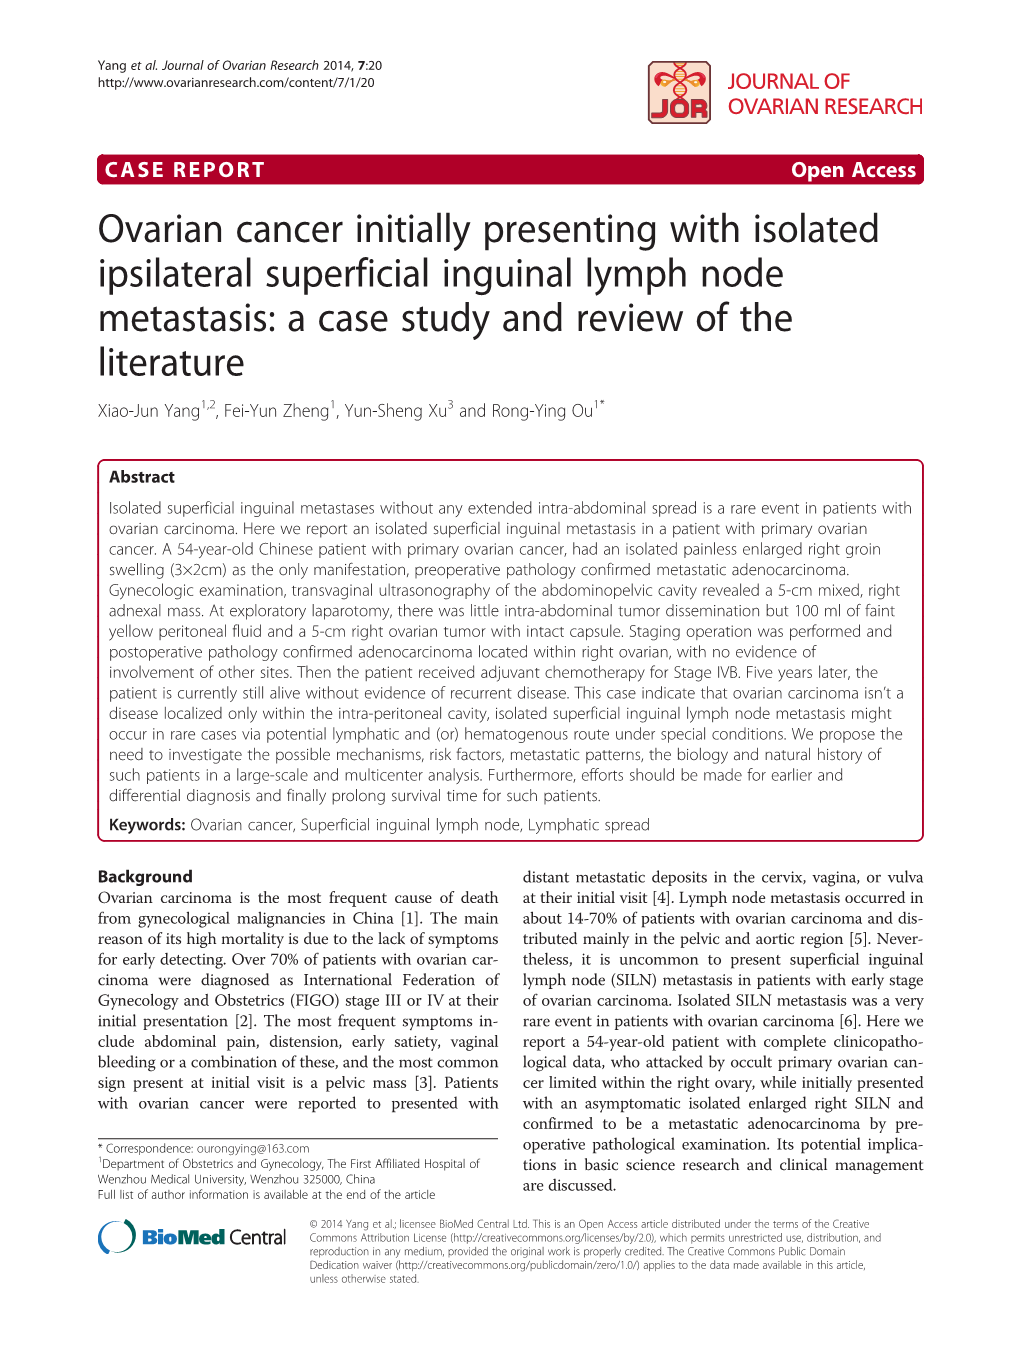 Ovarian Cancer Initially Presenting with Isolated Ipsilateral Superficial